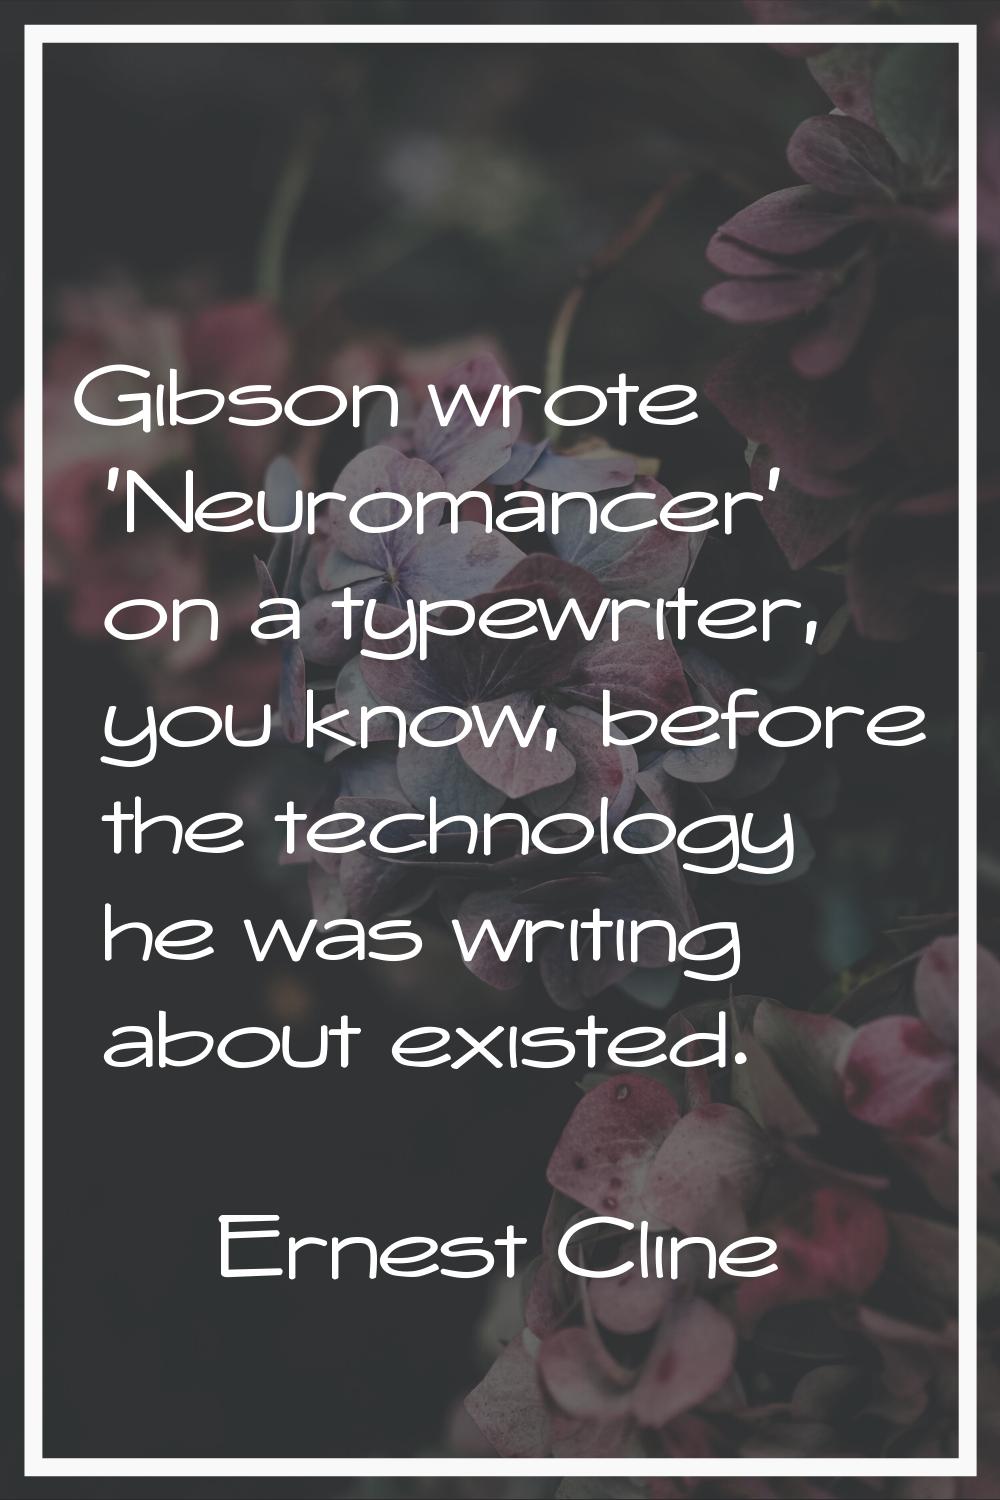 Gibson wrote 'Neuromancer' on a typewriter, you know, before the technology he was writing about ex